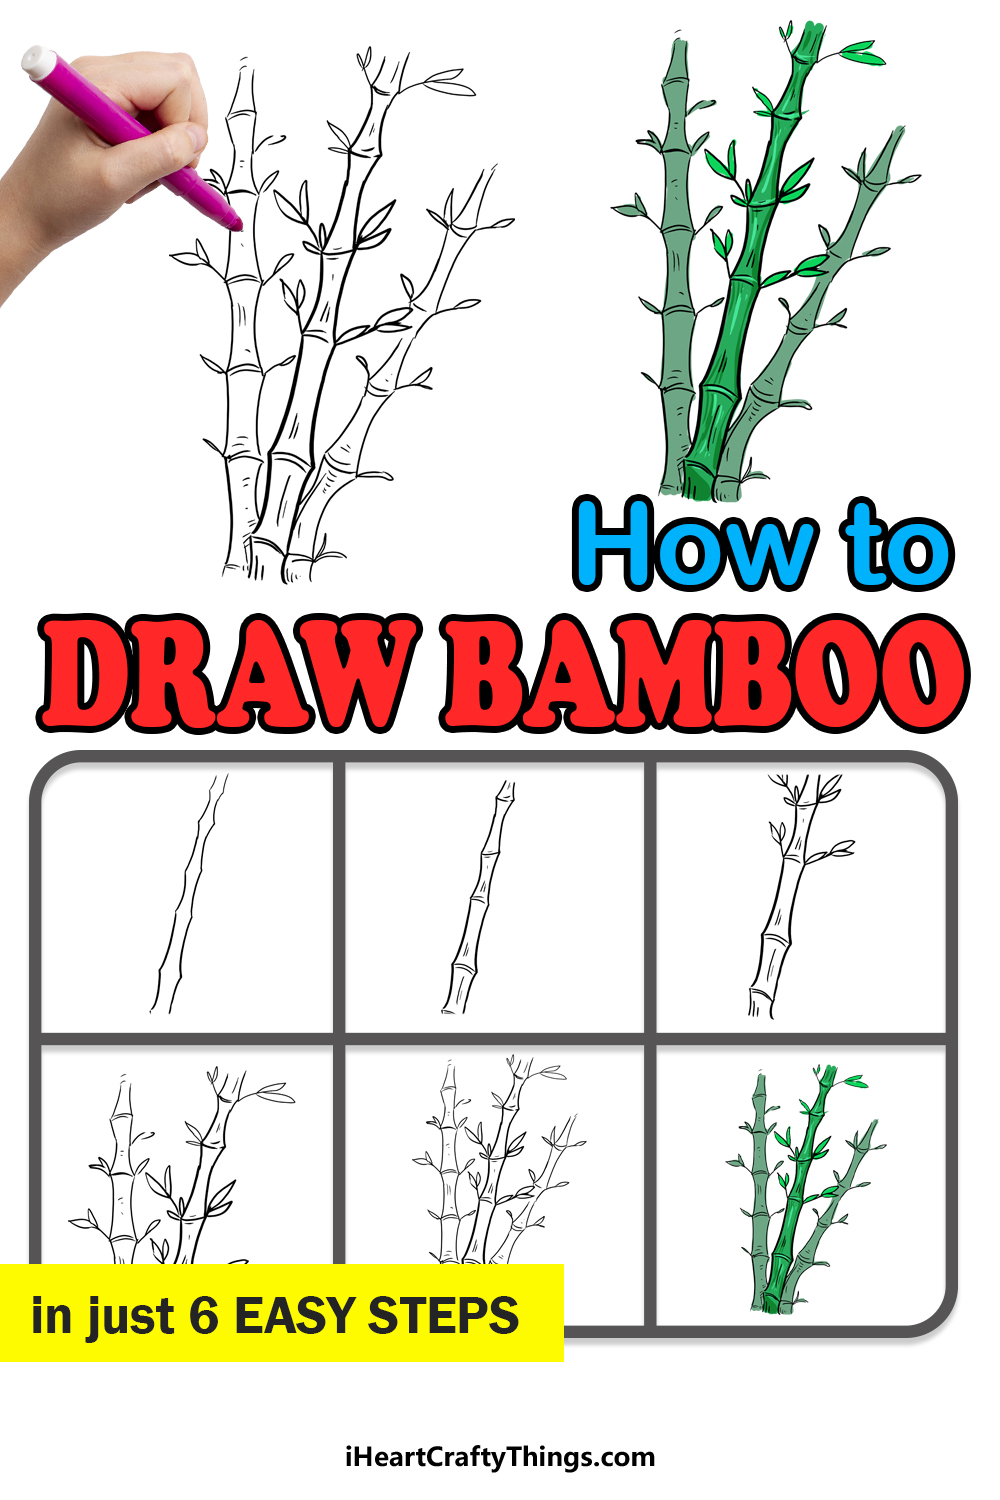 How to Draw Bamboo step by step guide